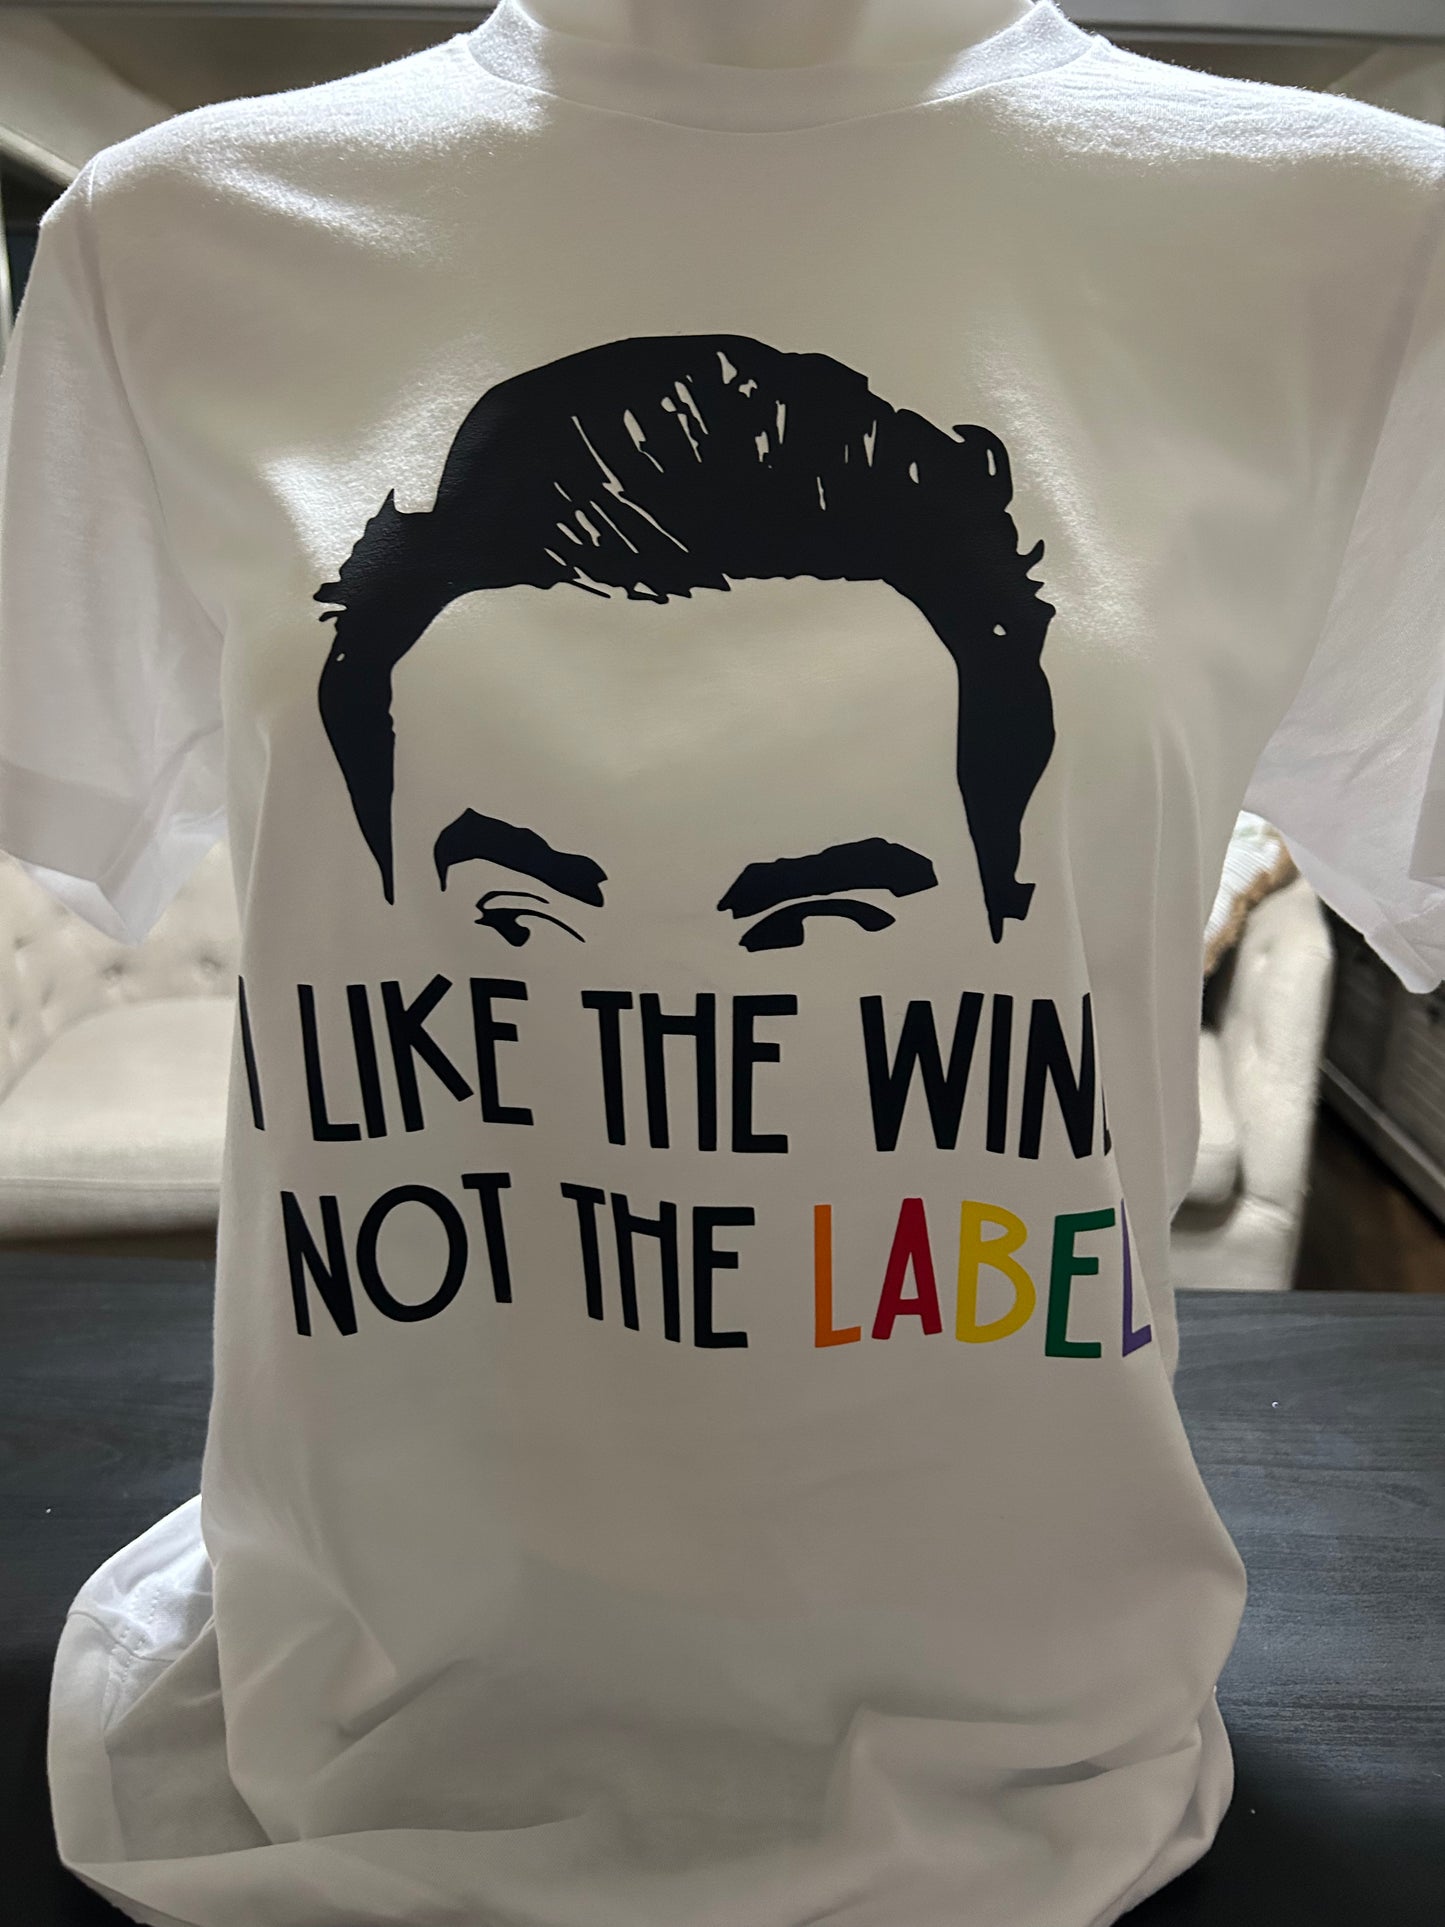 David Rose “I Like the Wine, Not the Label” Tee